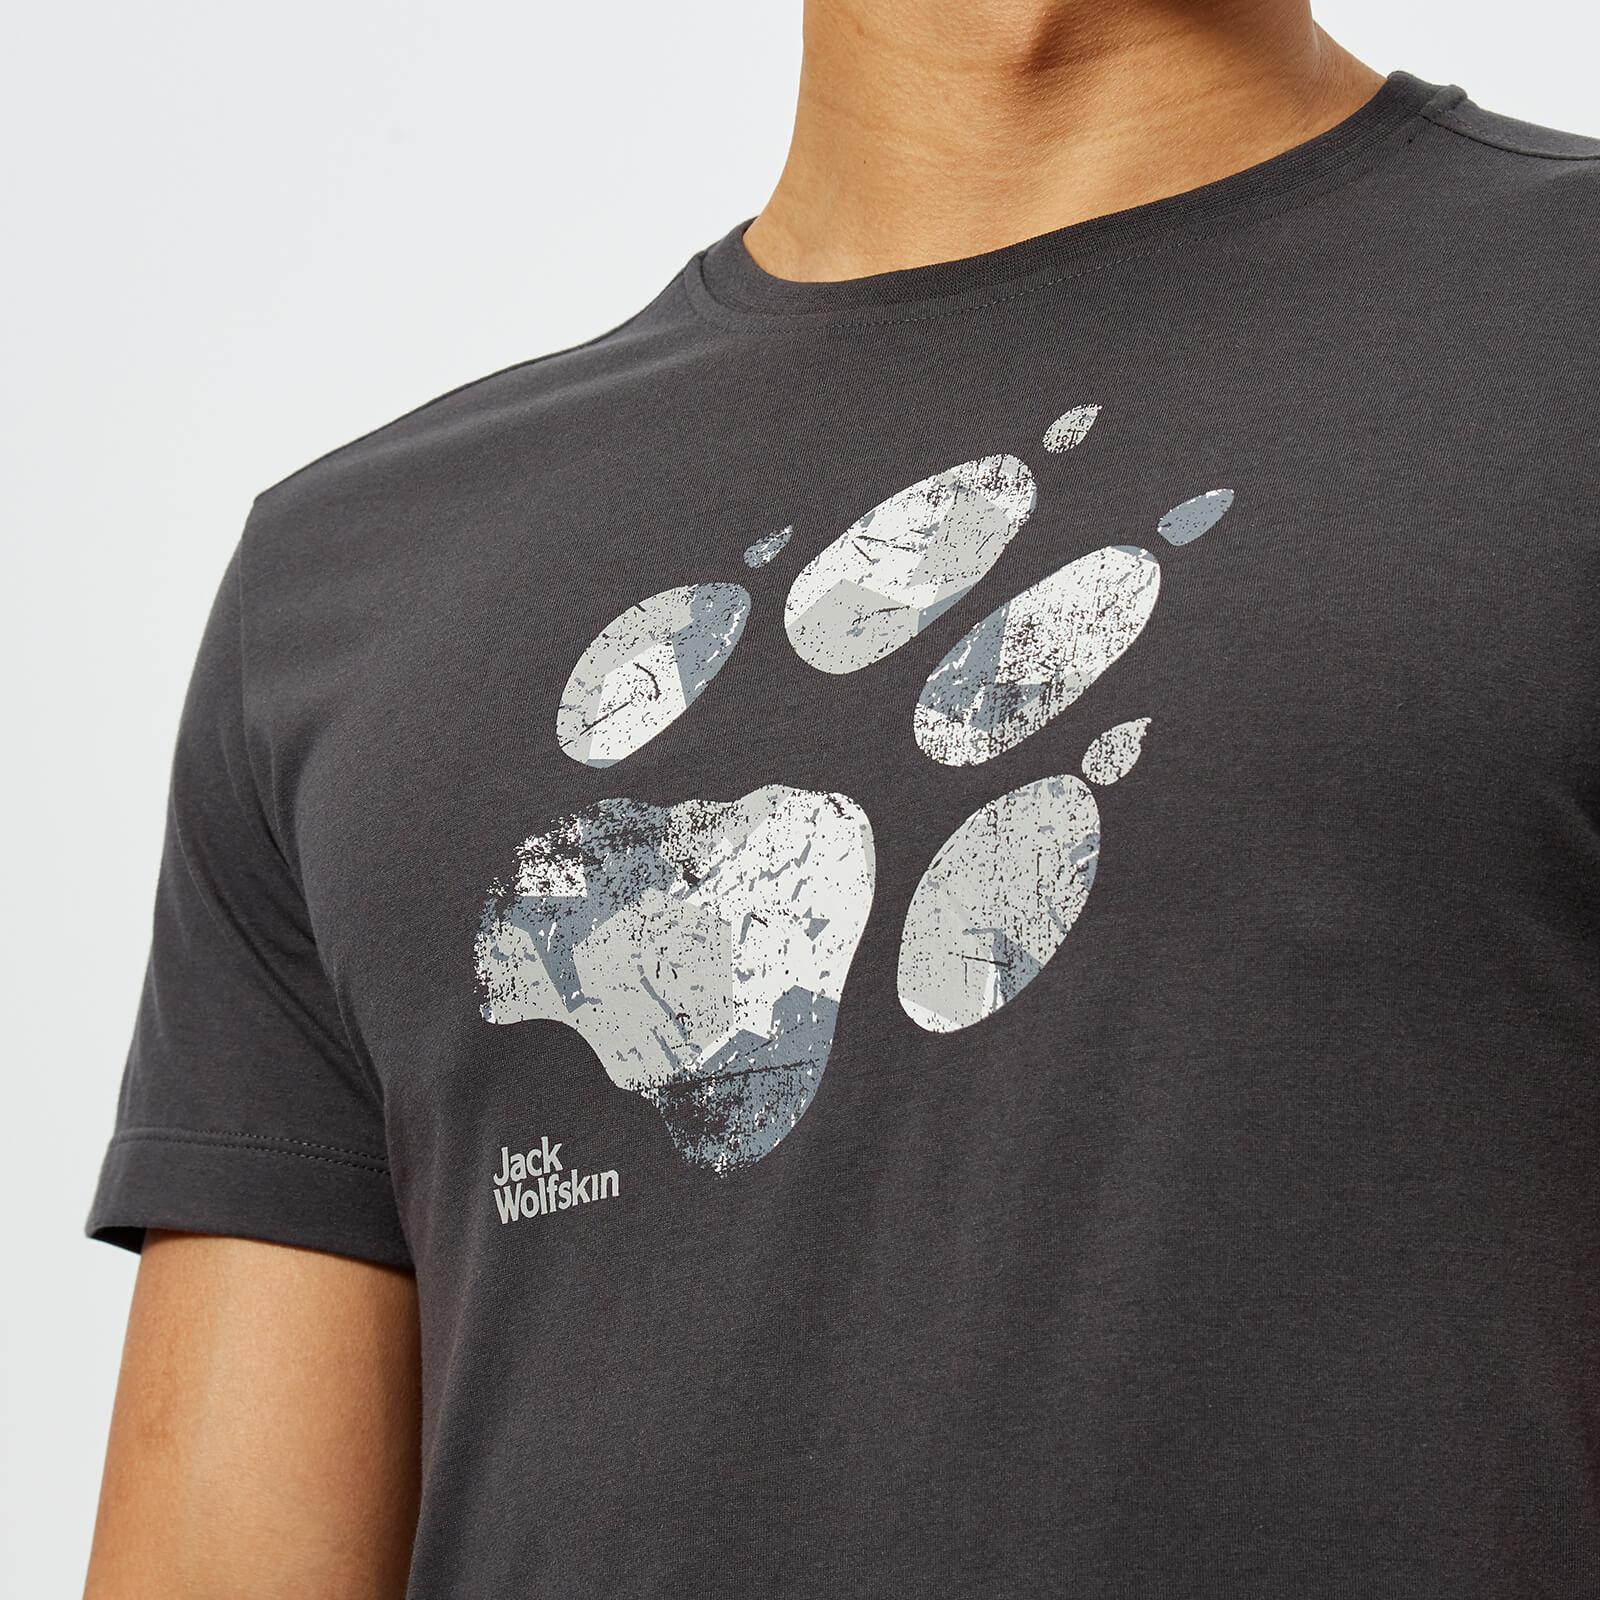 Jack Wolfskin Cotton Marble Paw T Shirt in Black for Men - Lyst